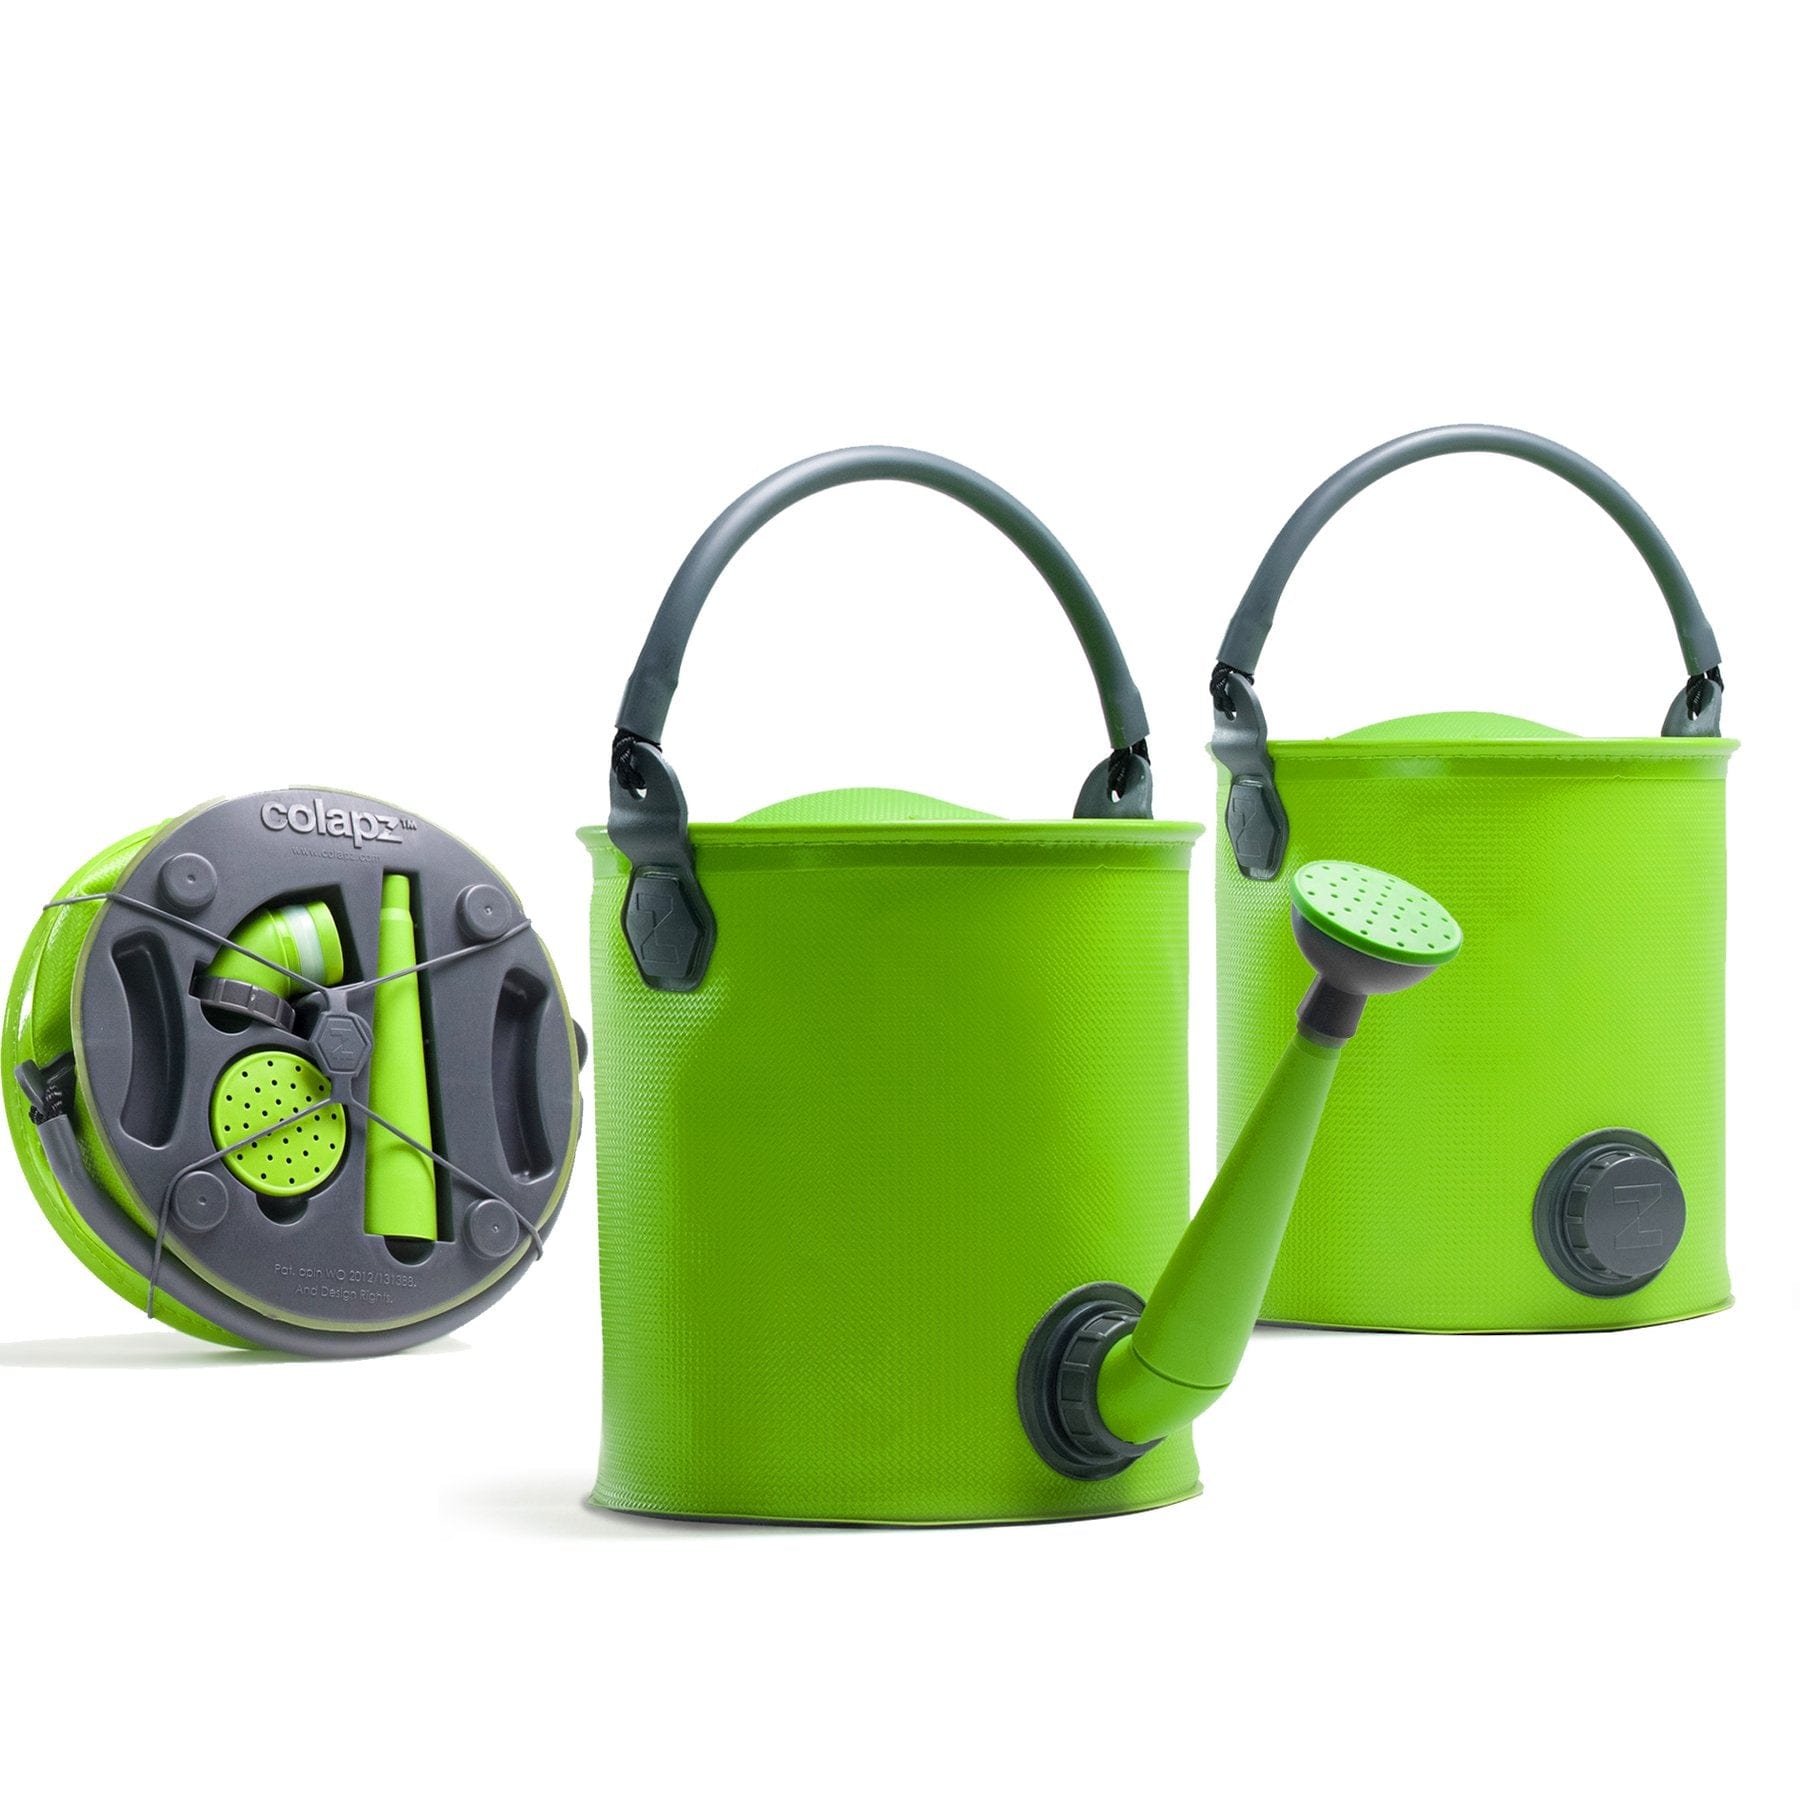 Hoses & Brushes Water COLAPZ Watering Can & Bucket – GREEN Collapsible Waste Outlet Connection Kit